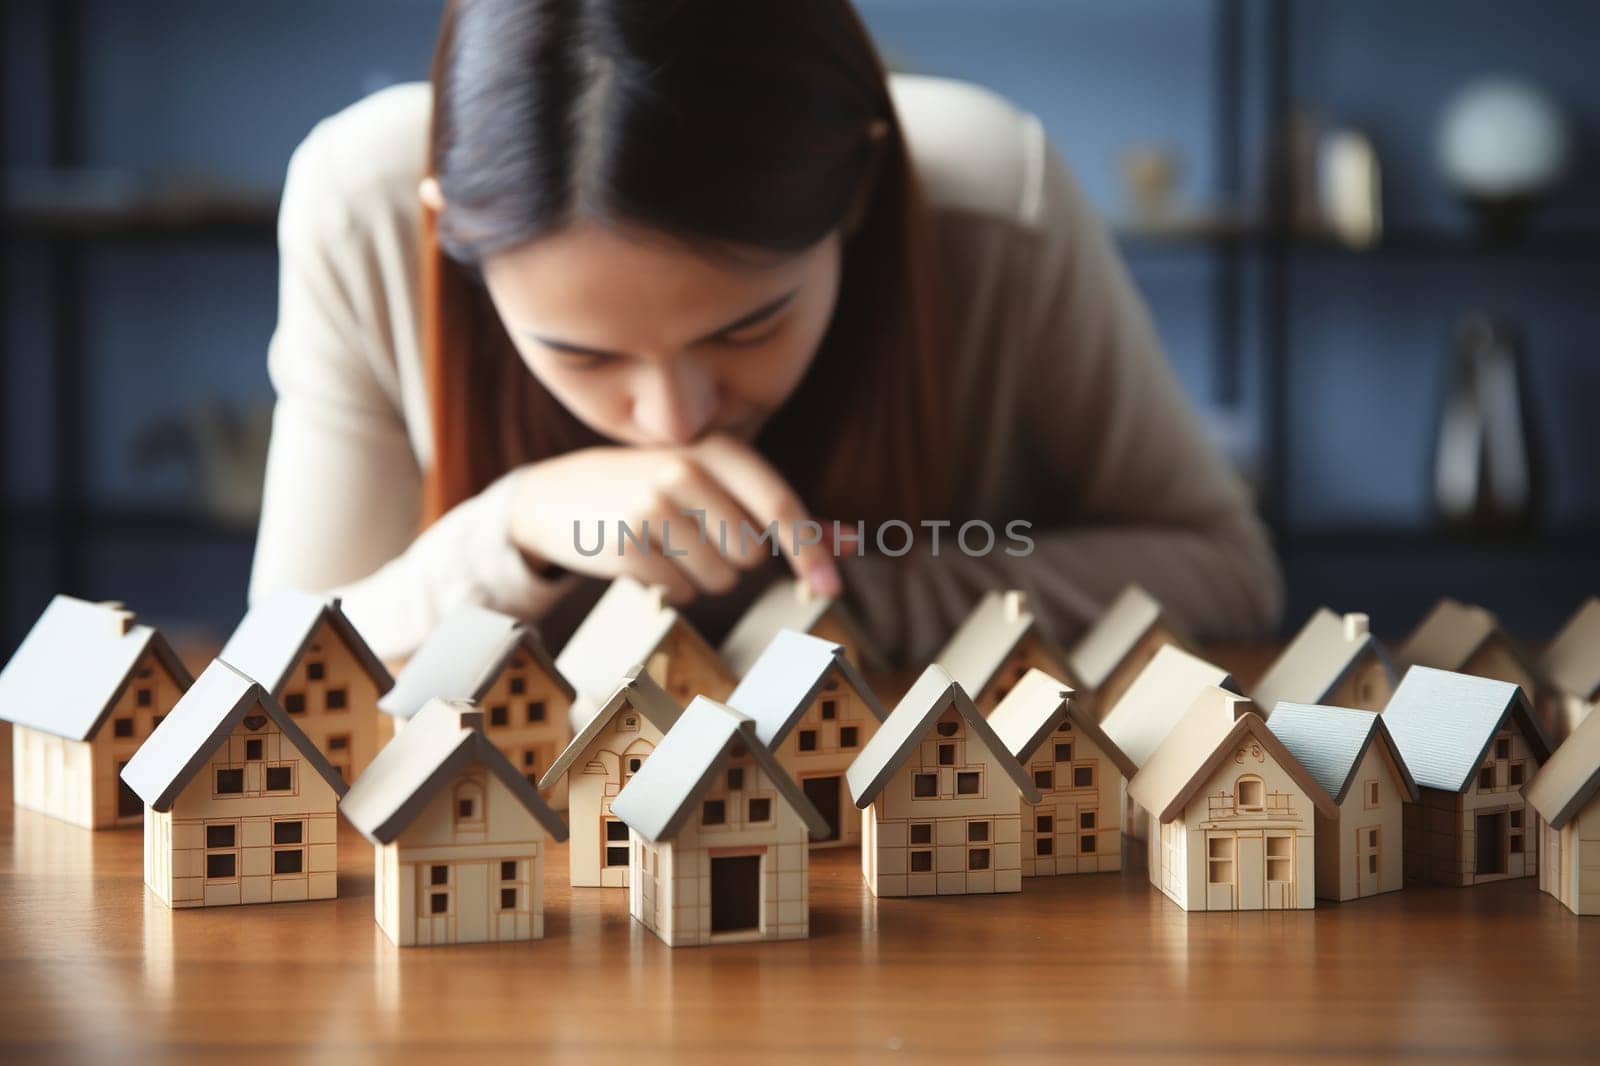 Difficulty finding housing. Wooden house models on the table next to the girl. Generated by artificial intelligence by Vovmar